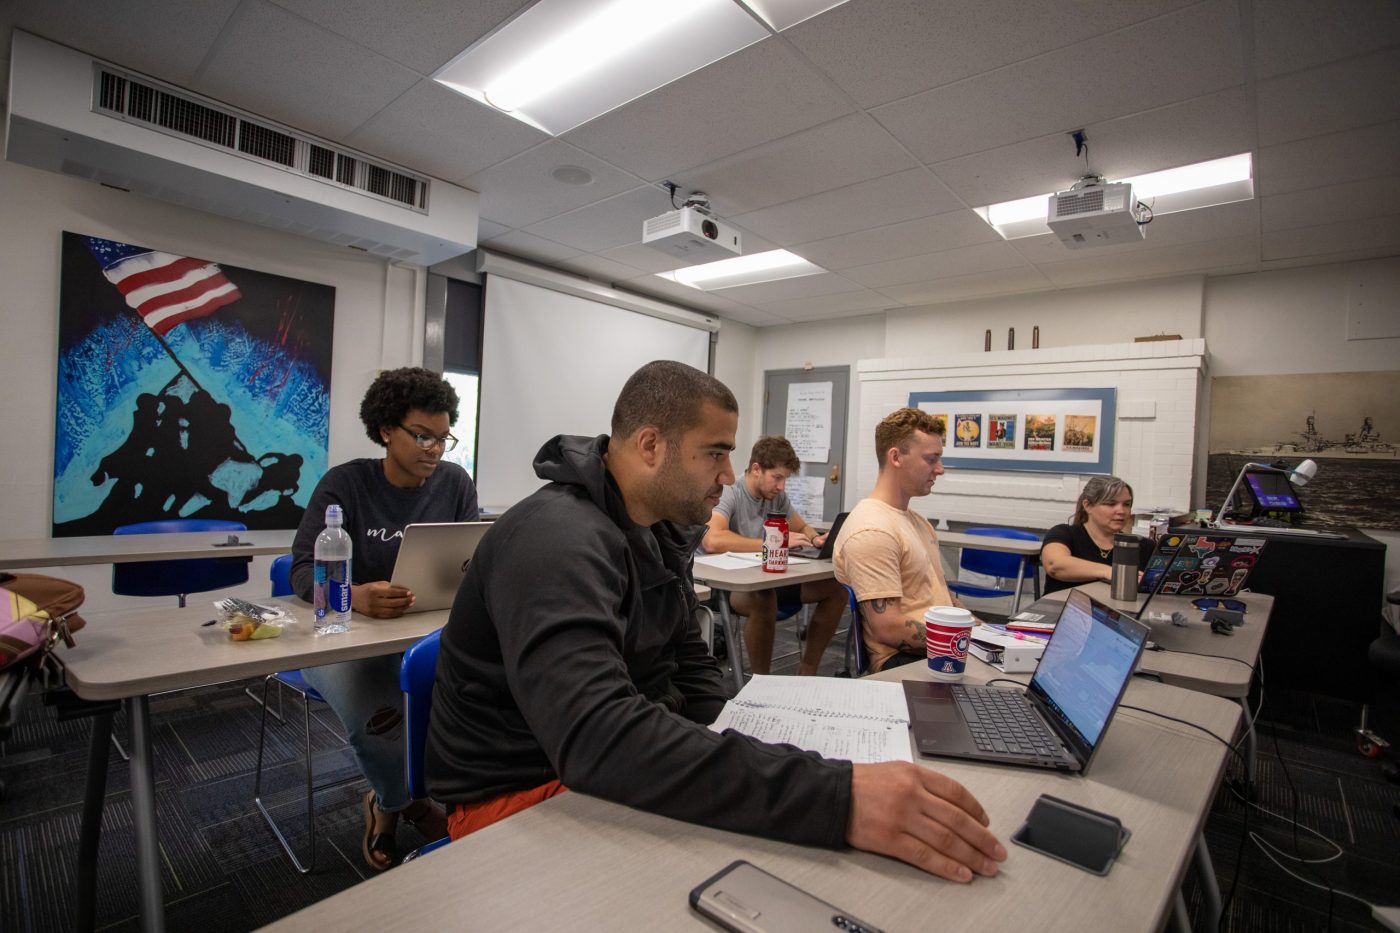 Warrior-Scholar Project offers free one- and two-week academic boot camps at college campuses nationwide.